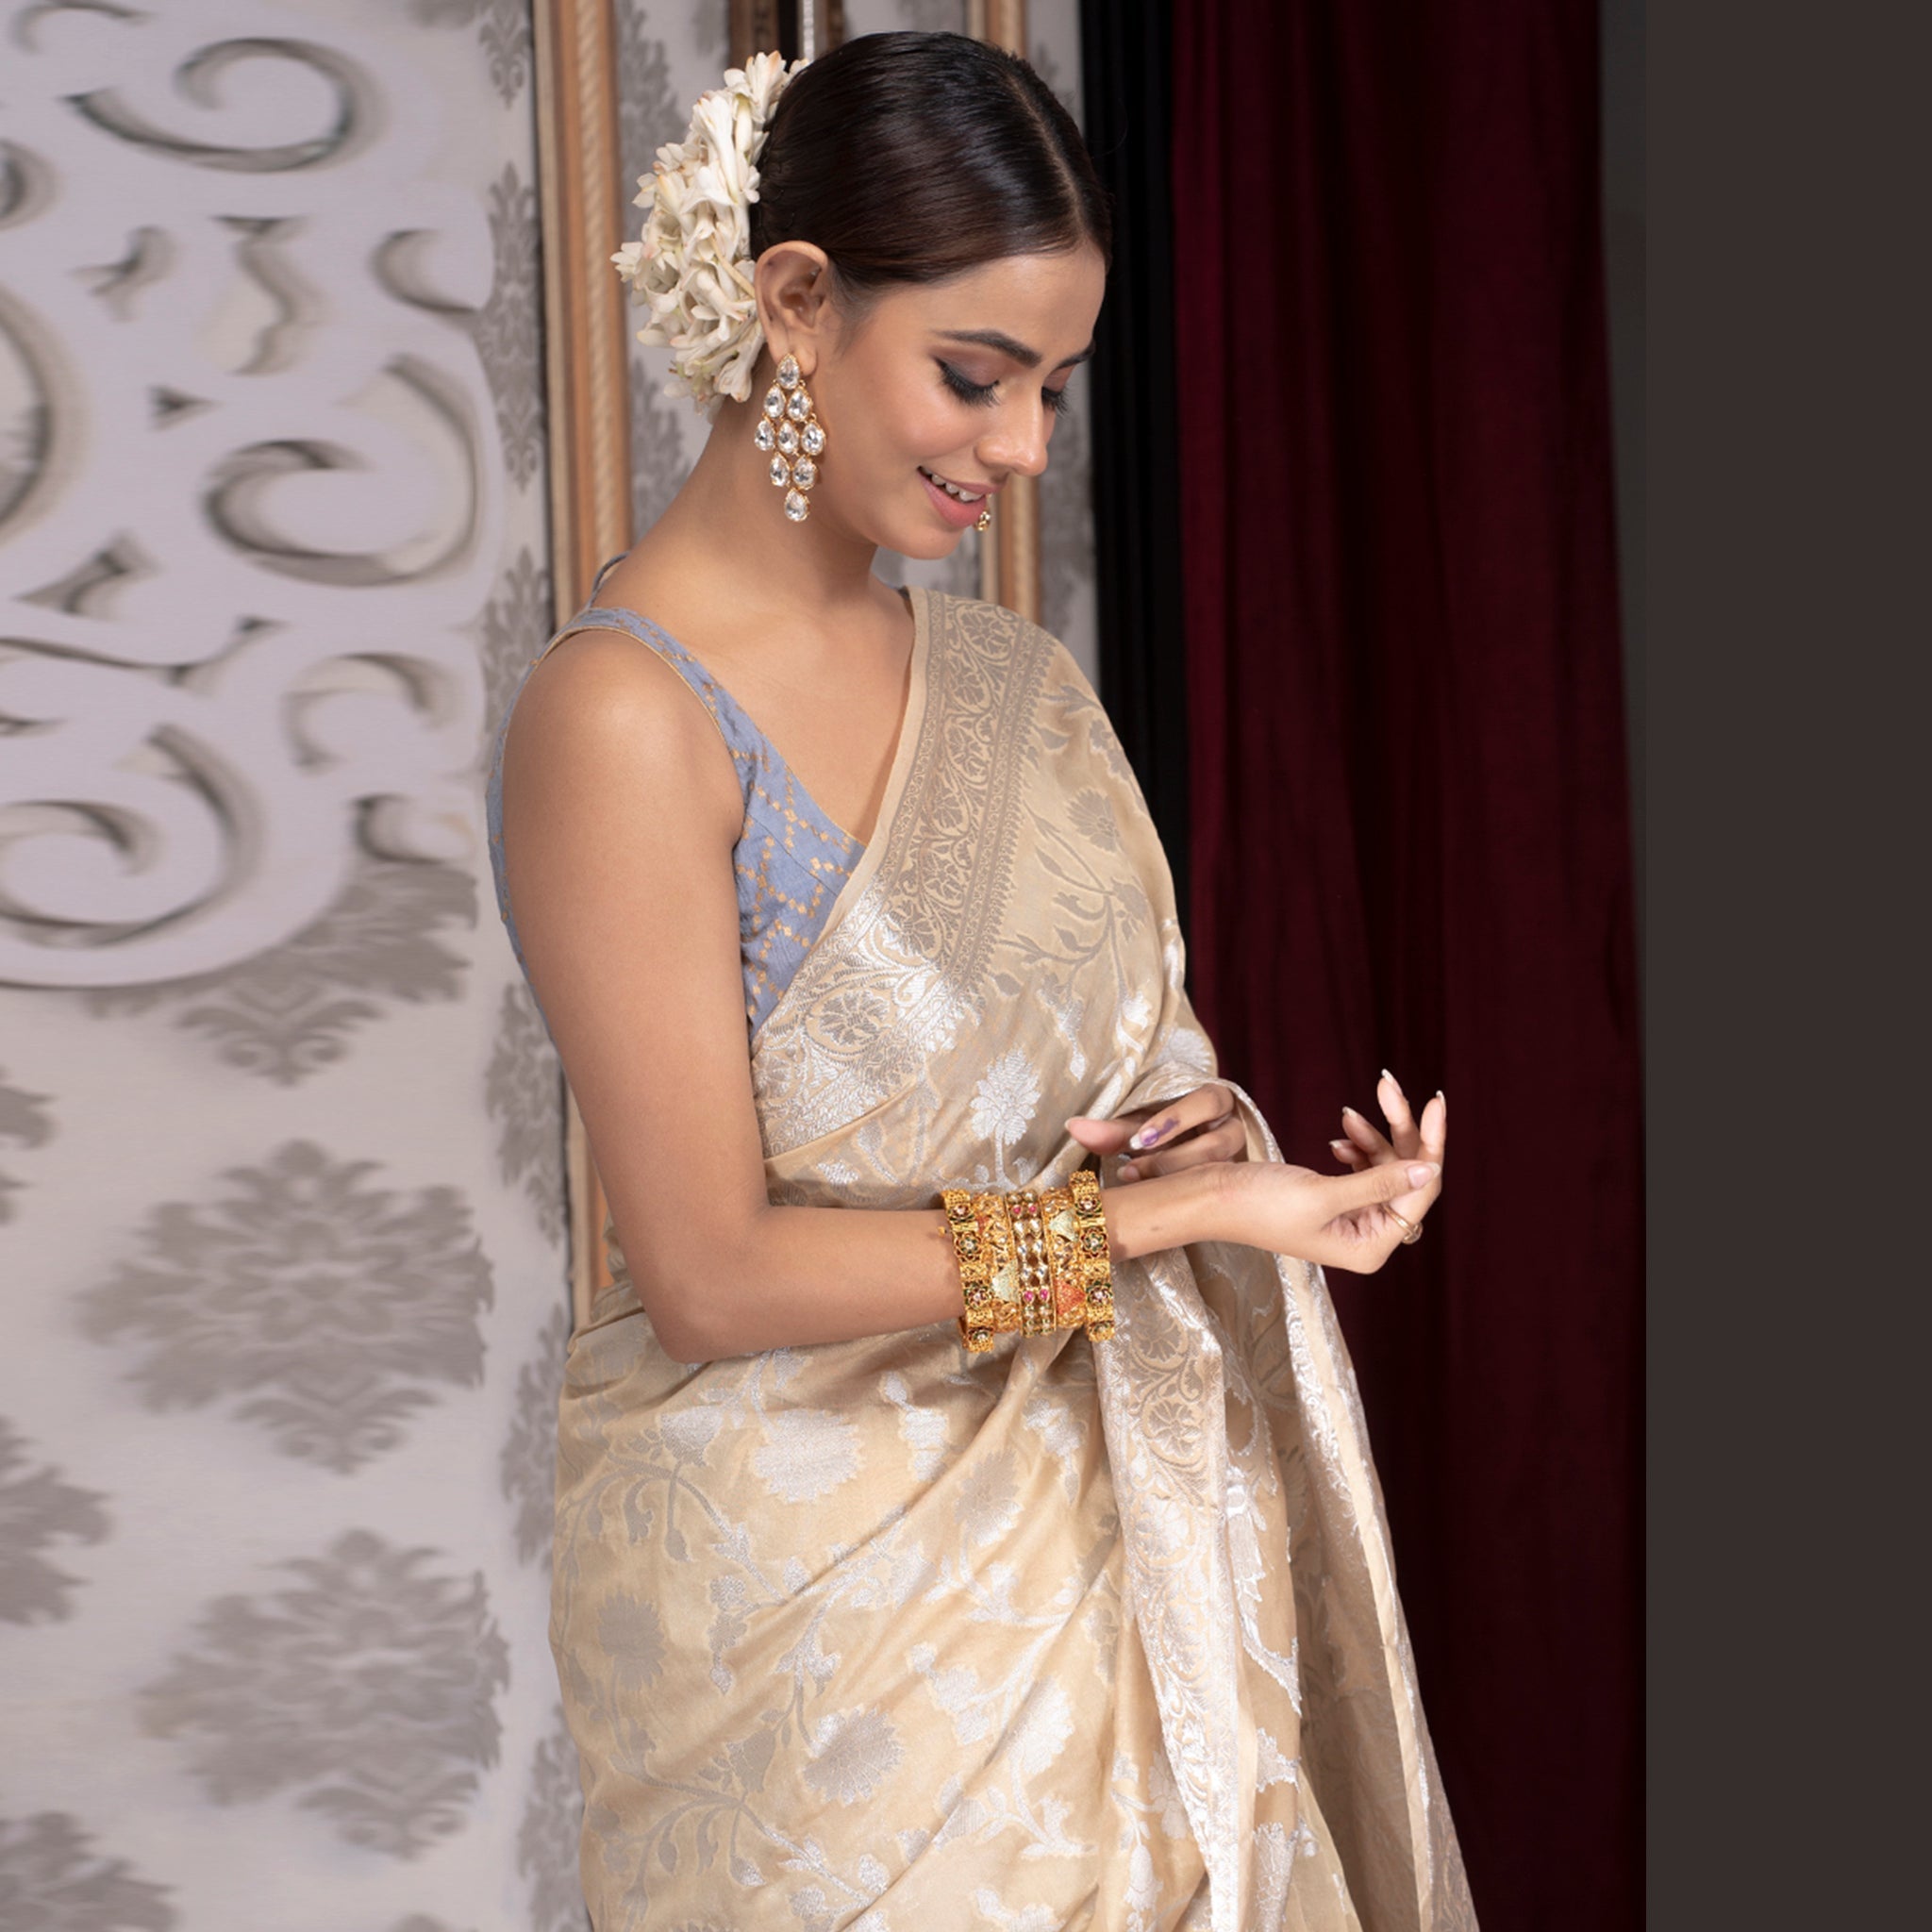 Women's Beige Pure Georgette Saree With Antique Silver Jaal Border And Pallu - Boveee